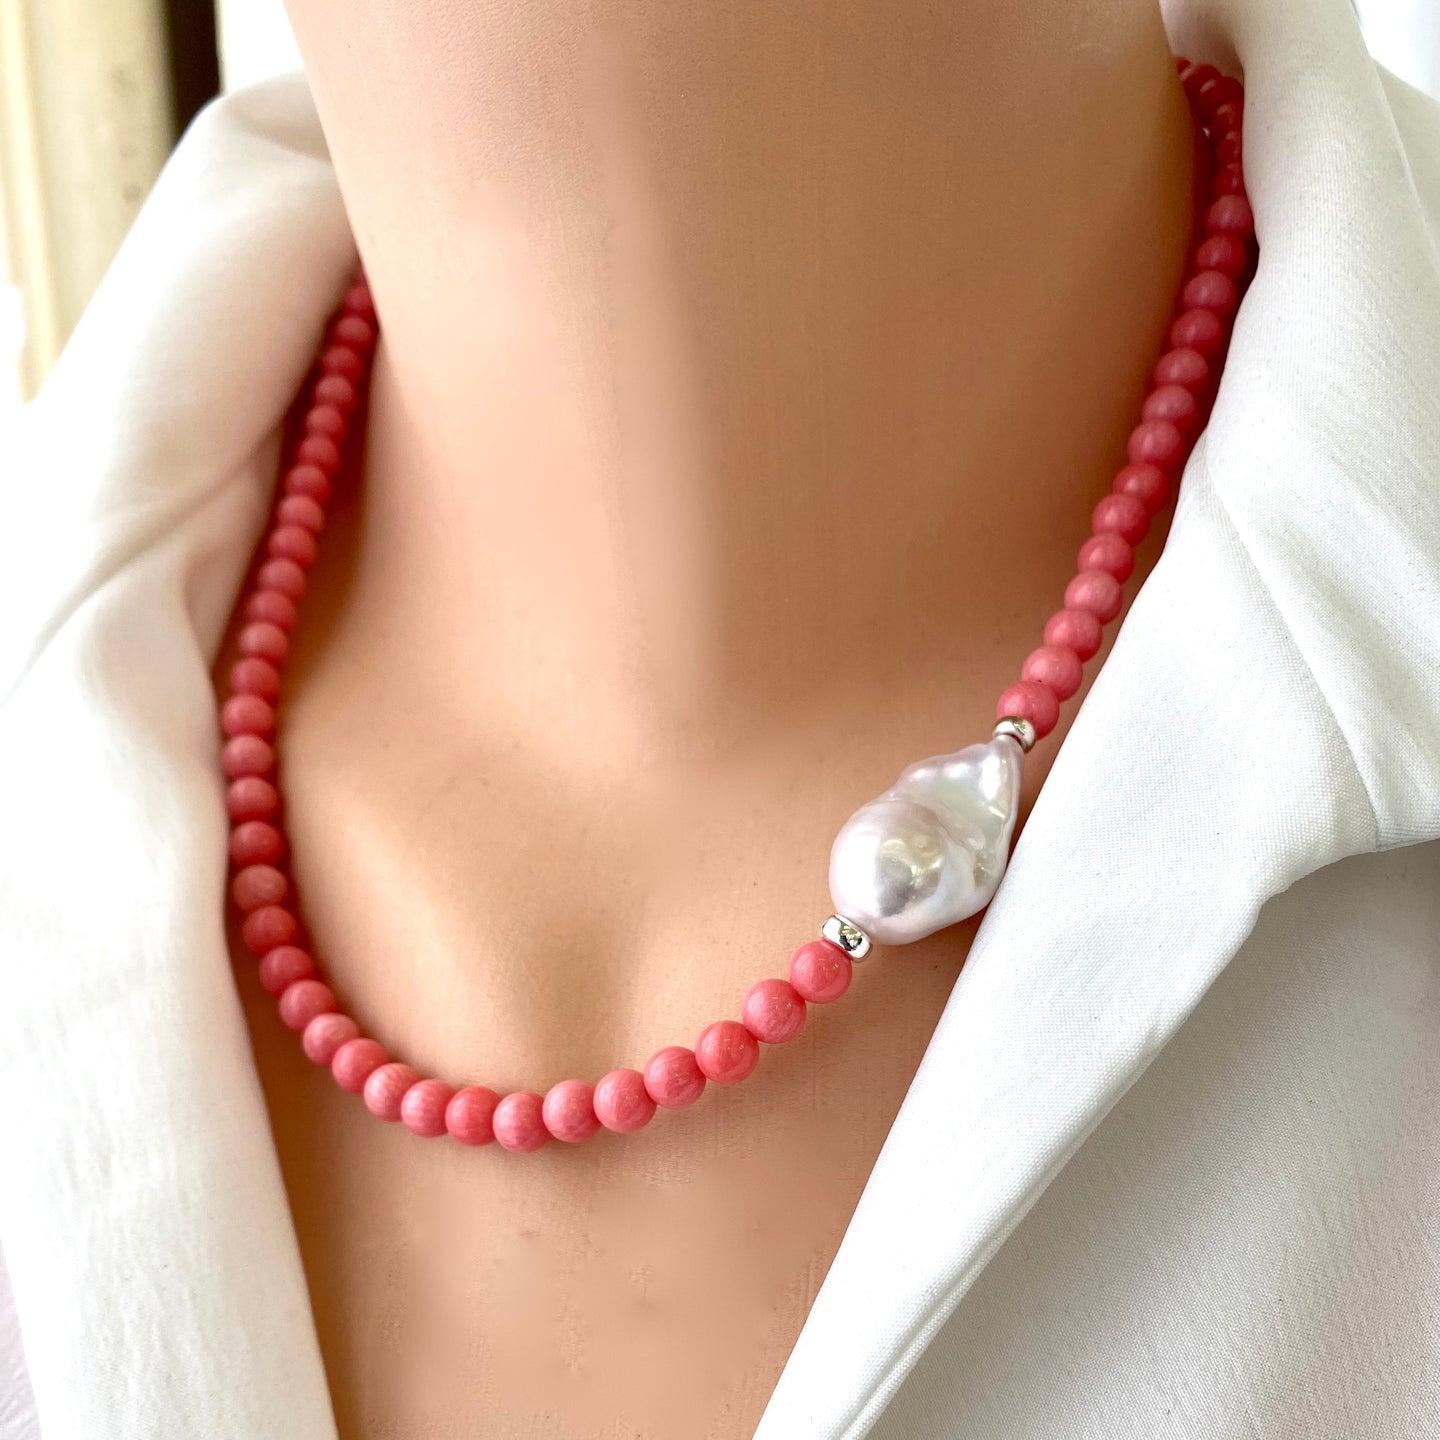 Pink Coral and Baroque Pearl Necklace with Sterling Silver Details, Summer jewelry, Beach jewelry, 18.5